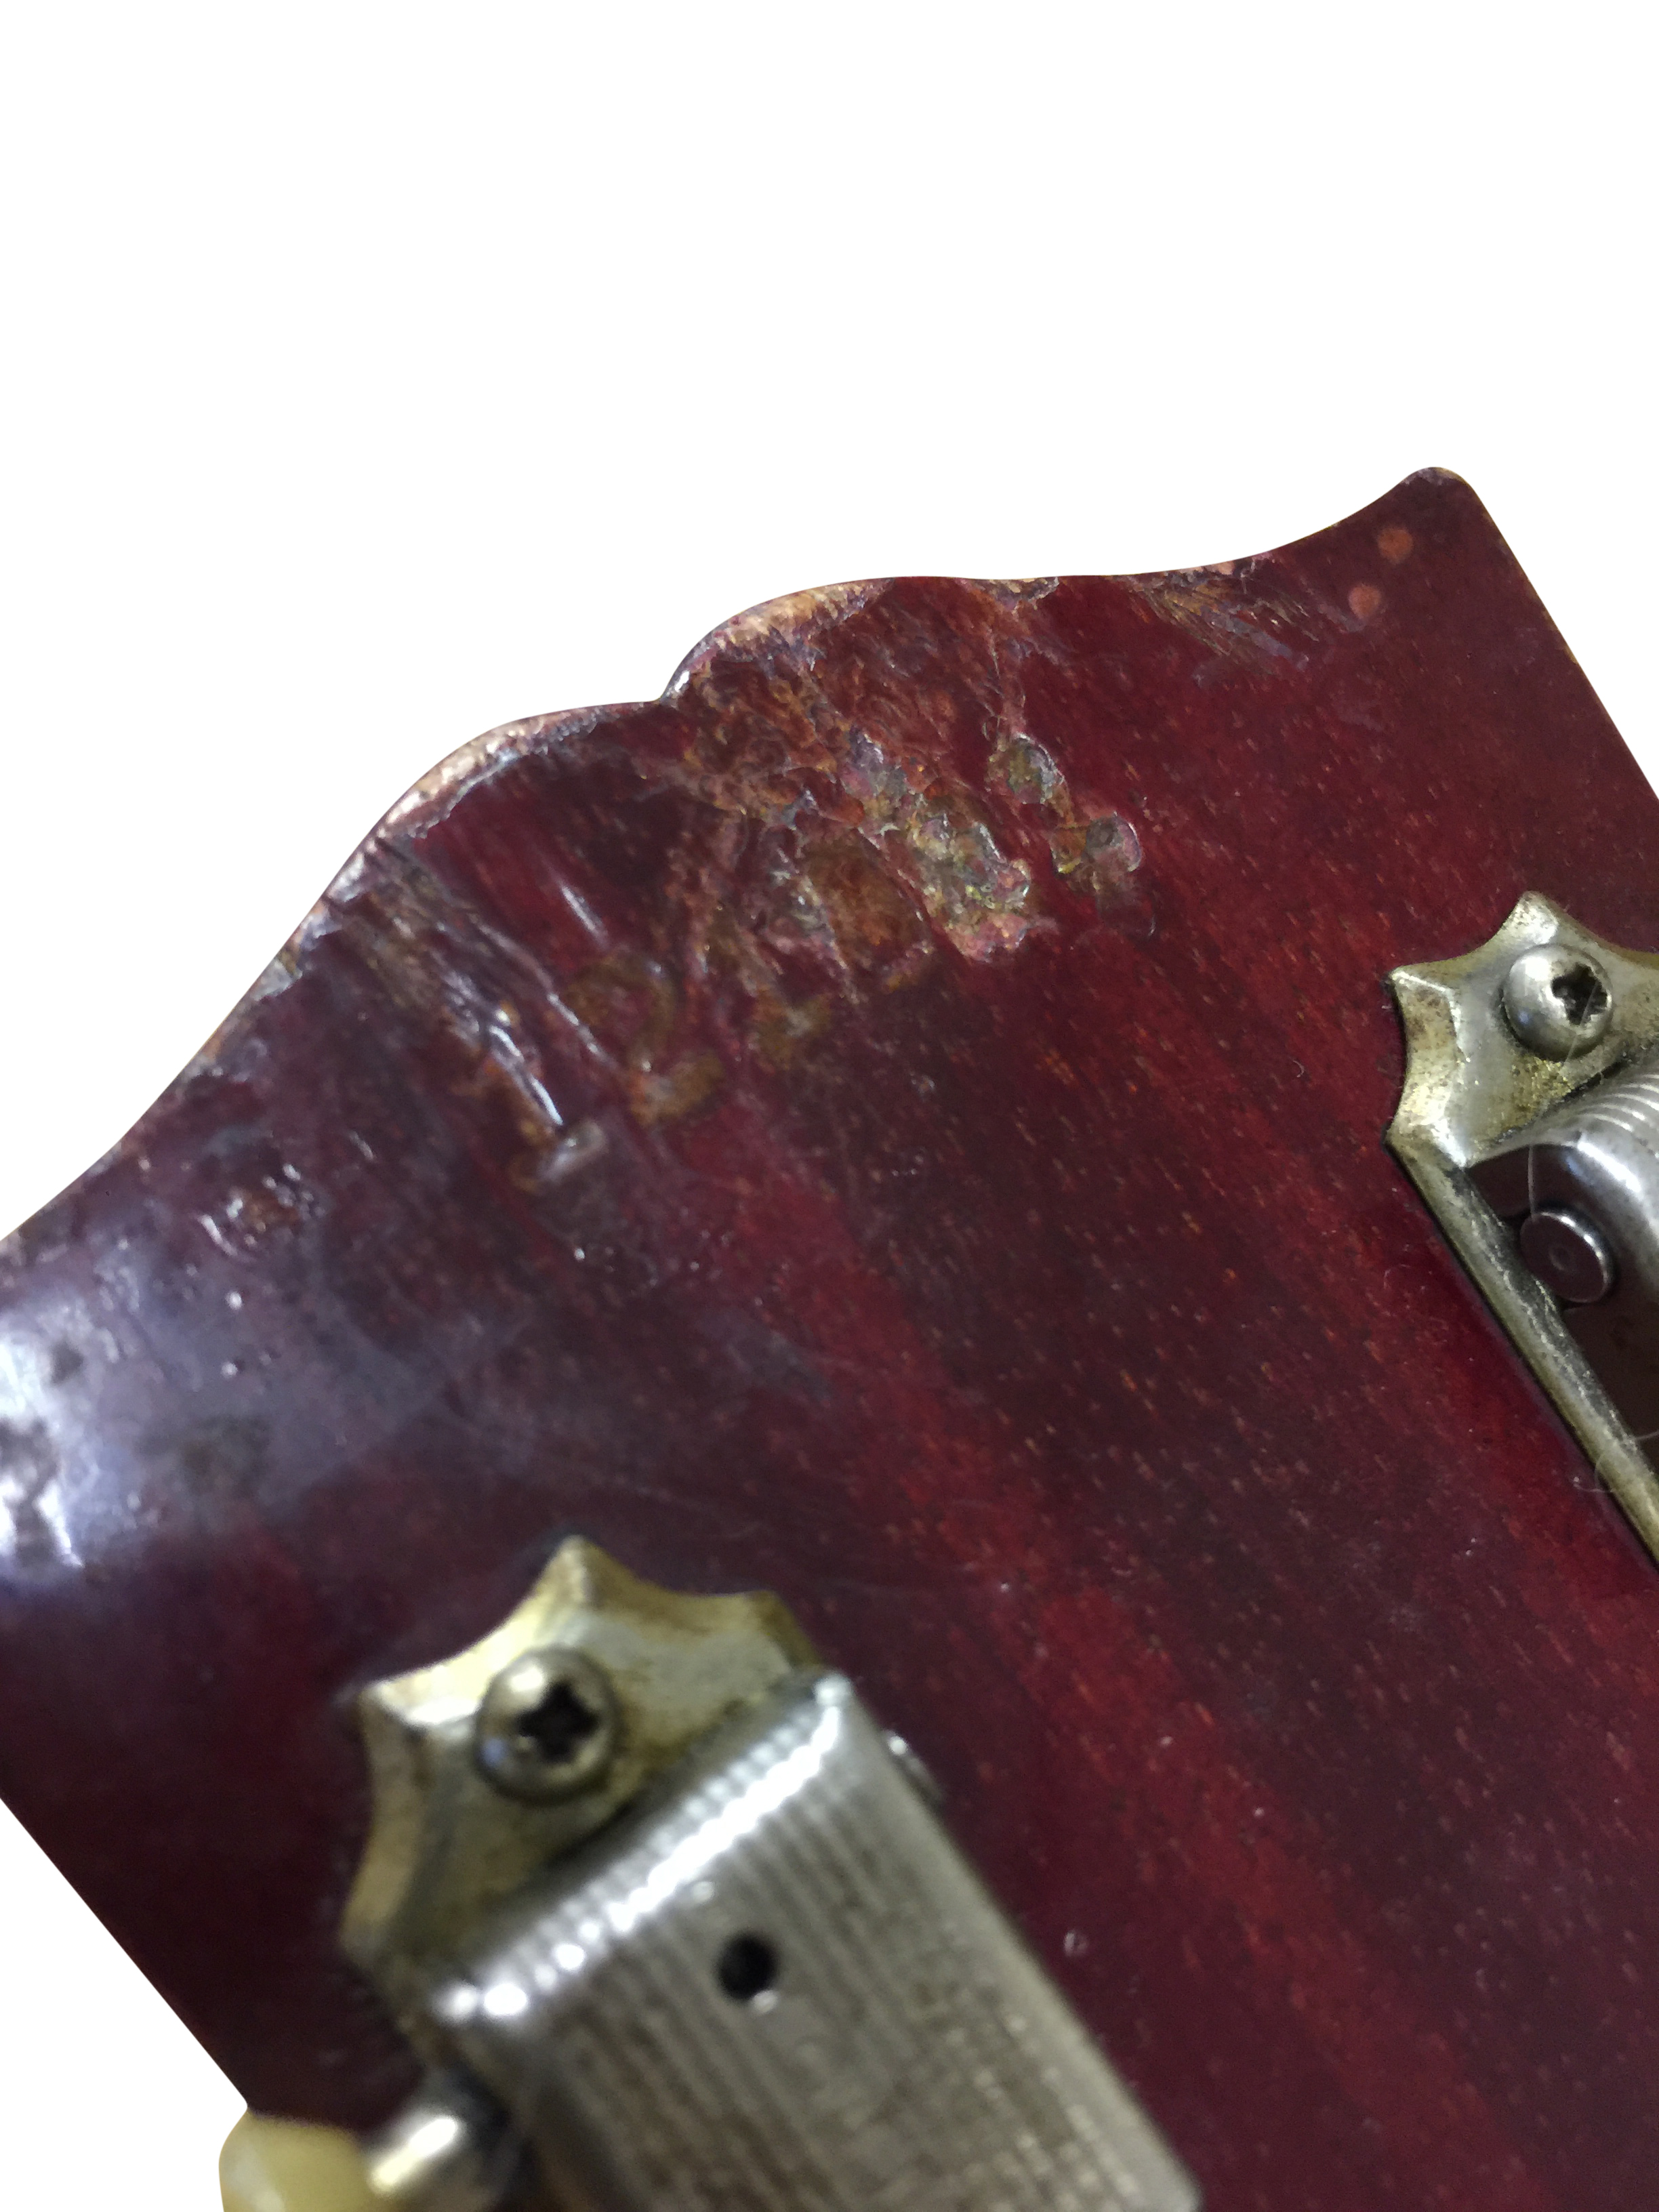 1963 GIBSON 335 CHERRY RED ELECTRIC GUITAR. - Image 9 of 20